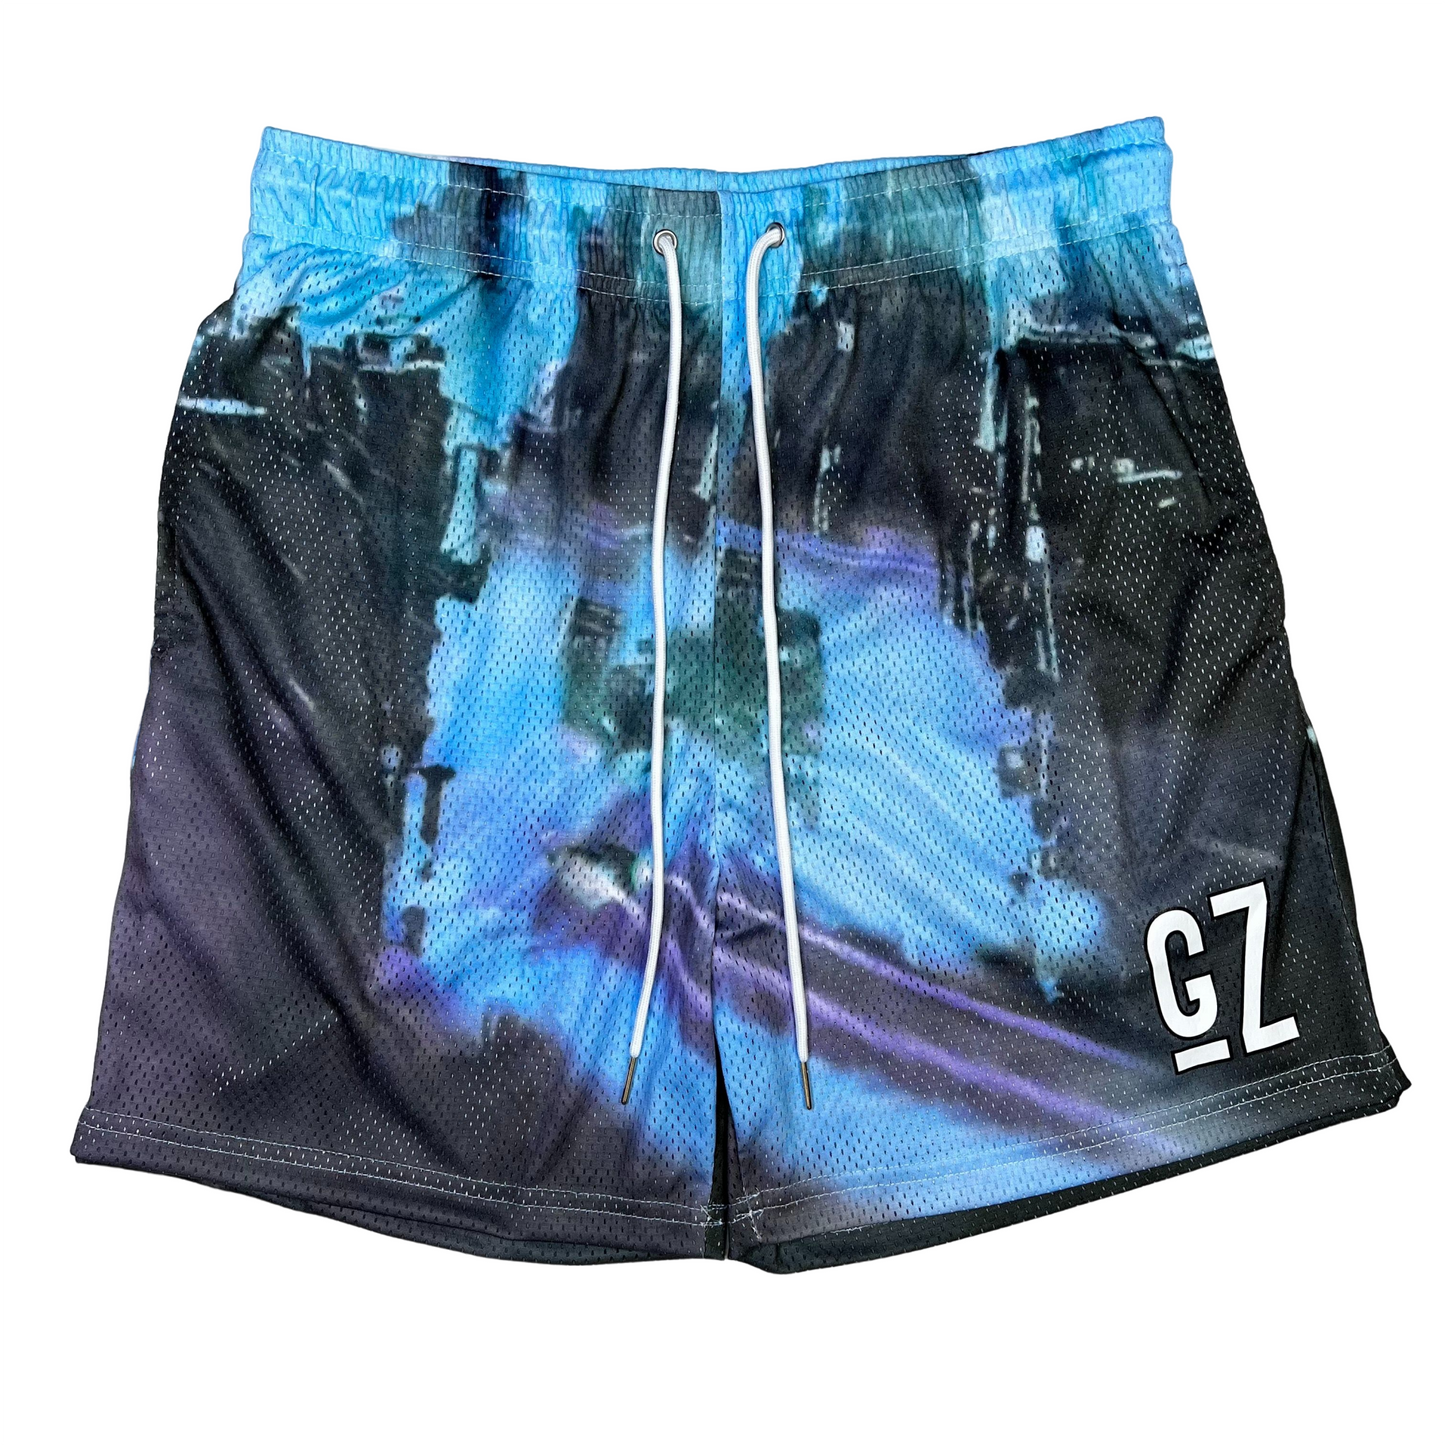 GZ Miami South Shore✥𝔾𝕣𝕠𝕦𝕟𝕕ℤ𝕖𝕣𝕠®✥2023 Southern suit big guy/GZ American casual neutral sports outdoor cyberpunk 2047 quarter shorts and ball pants 